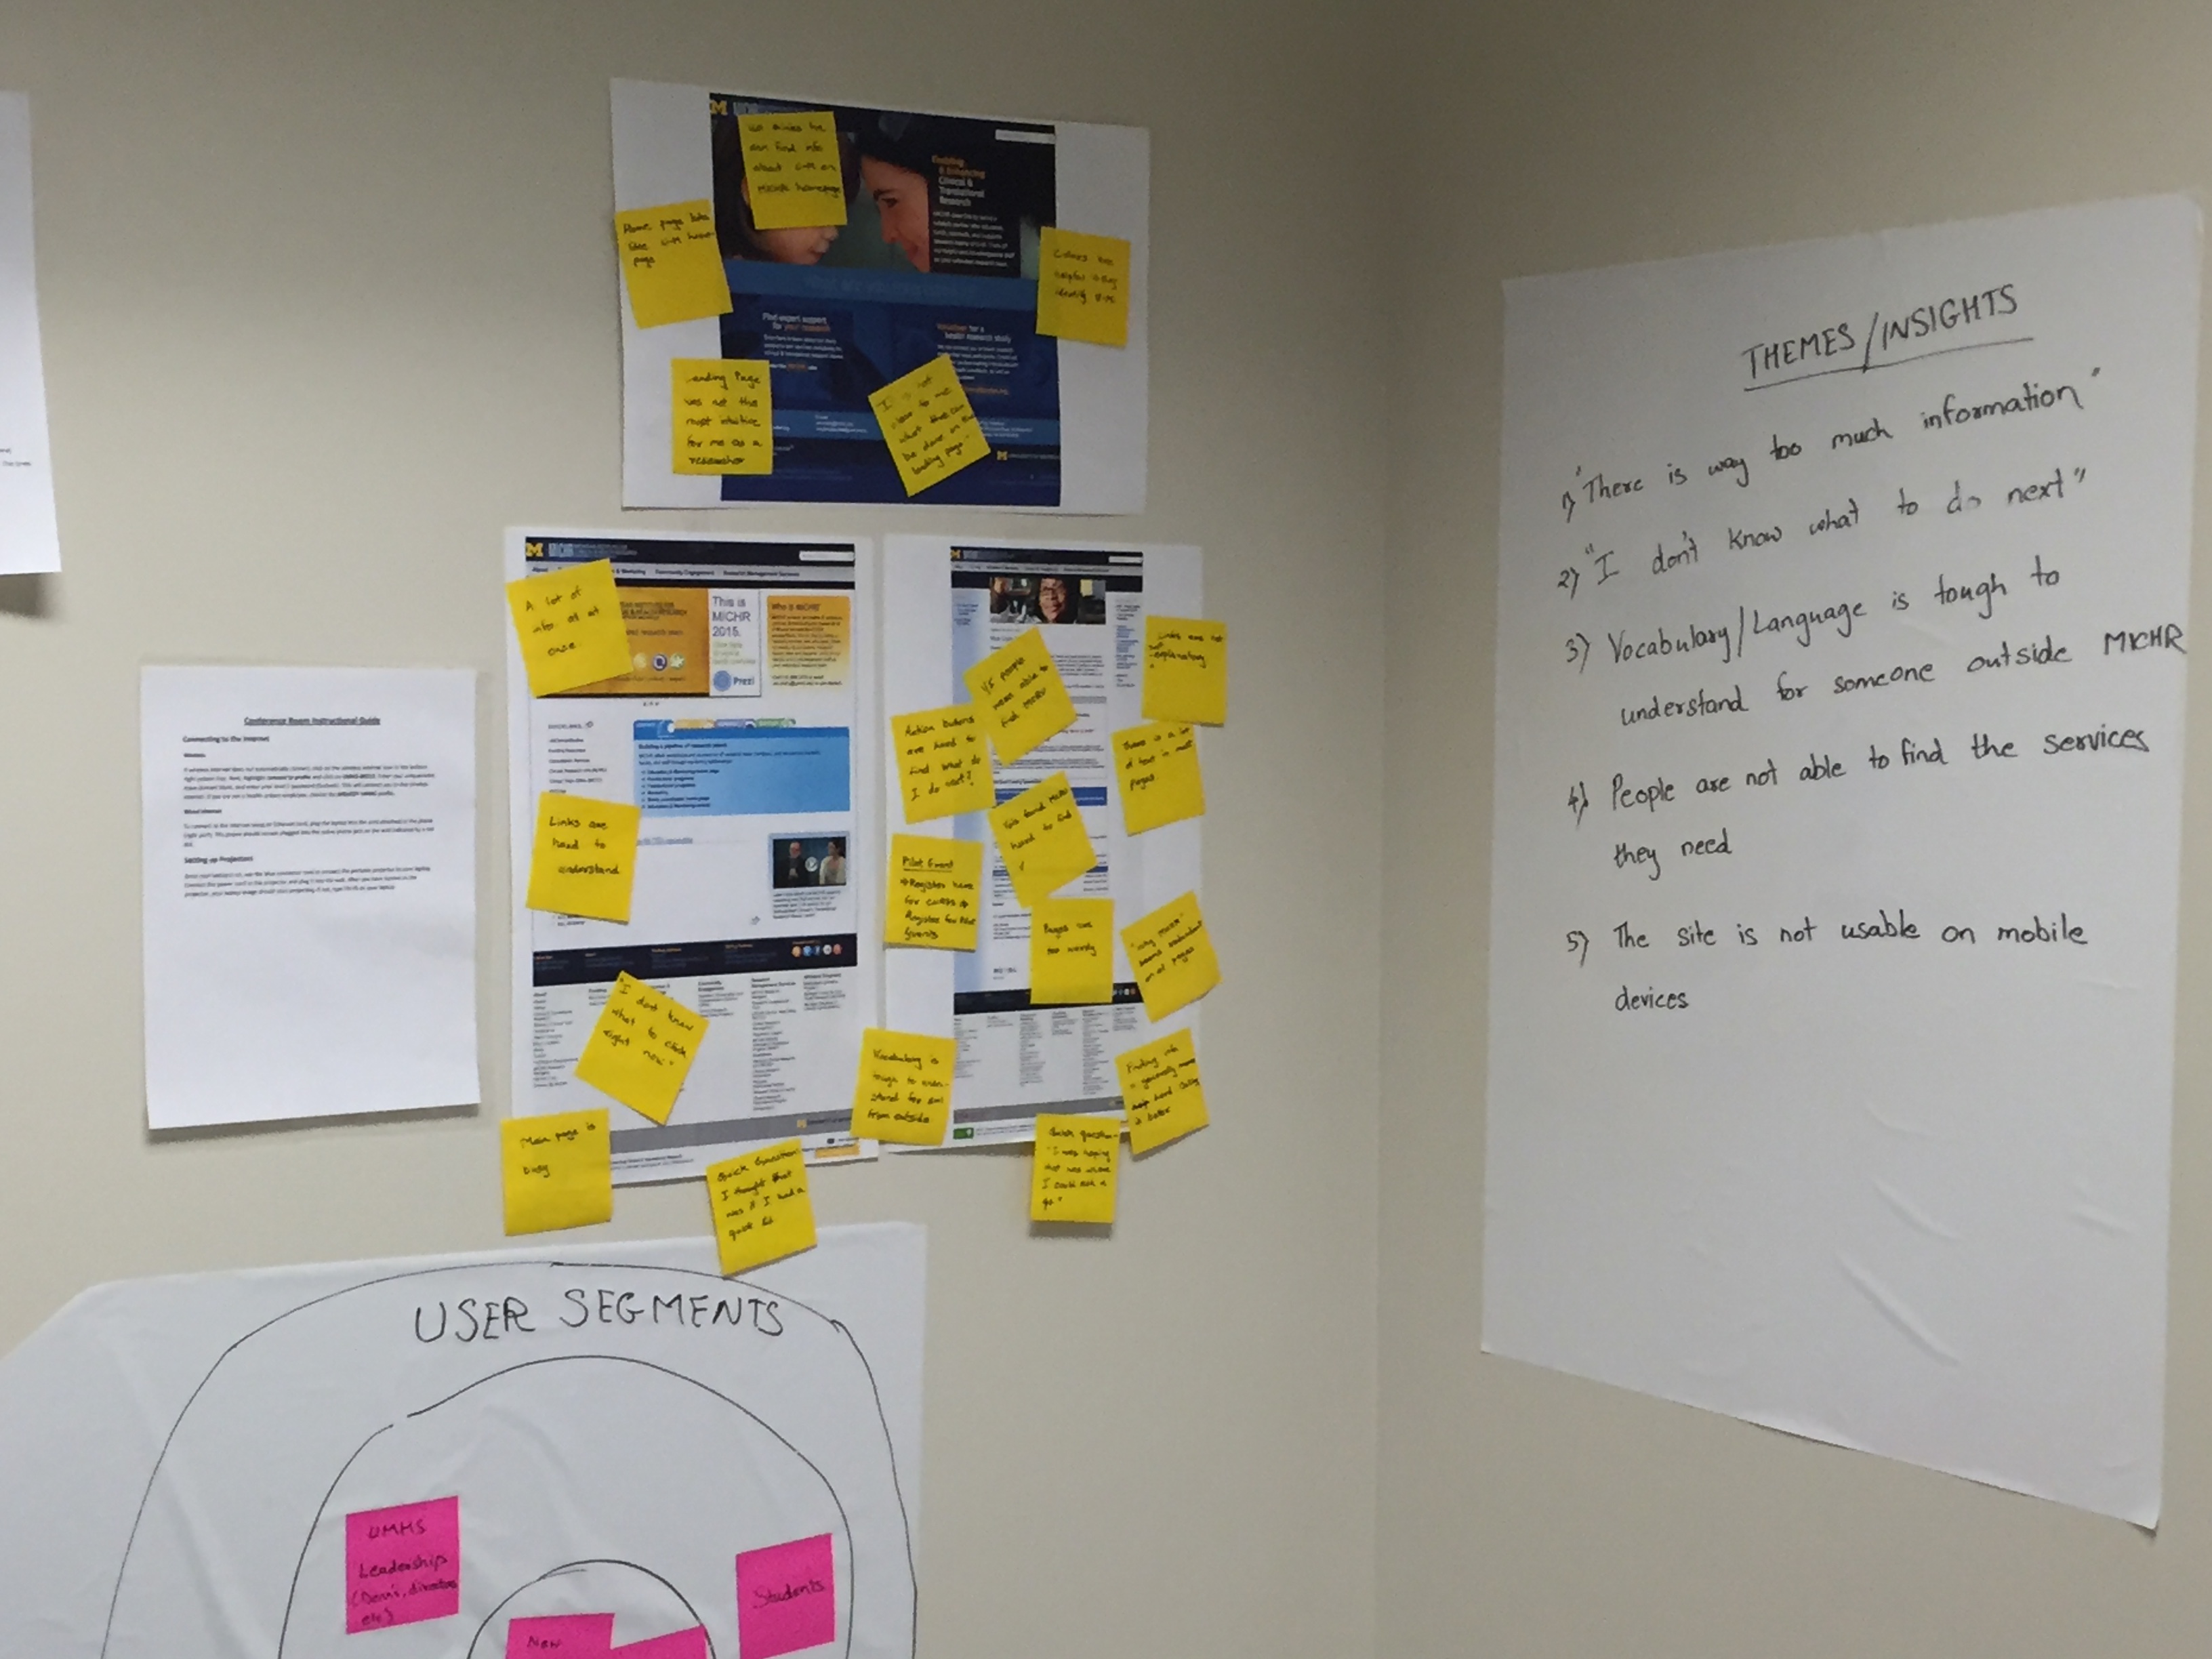 Our team room. On the left is feedback from users on the old website while the right shows synthesized insights from the design research phase.